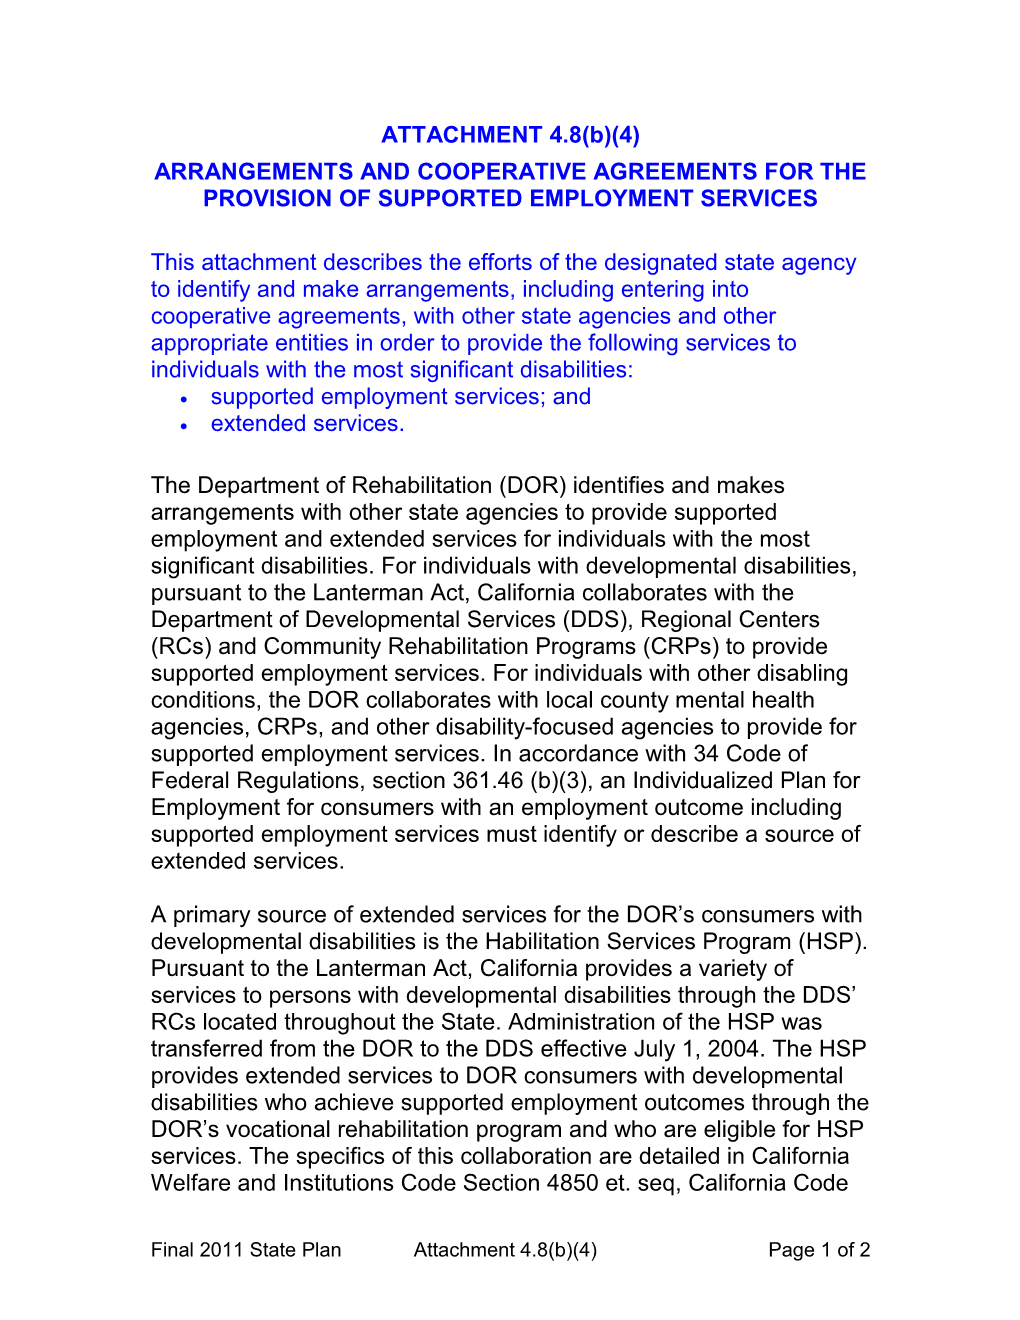 Arrangements and Cooperative Agreements for the Provision of Supported Employment Services